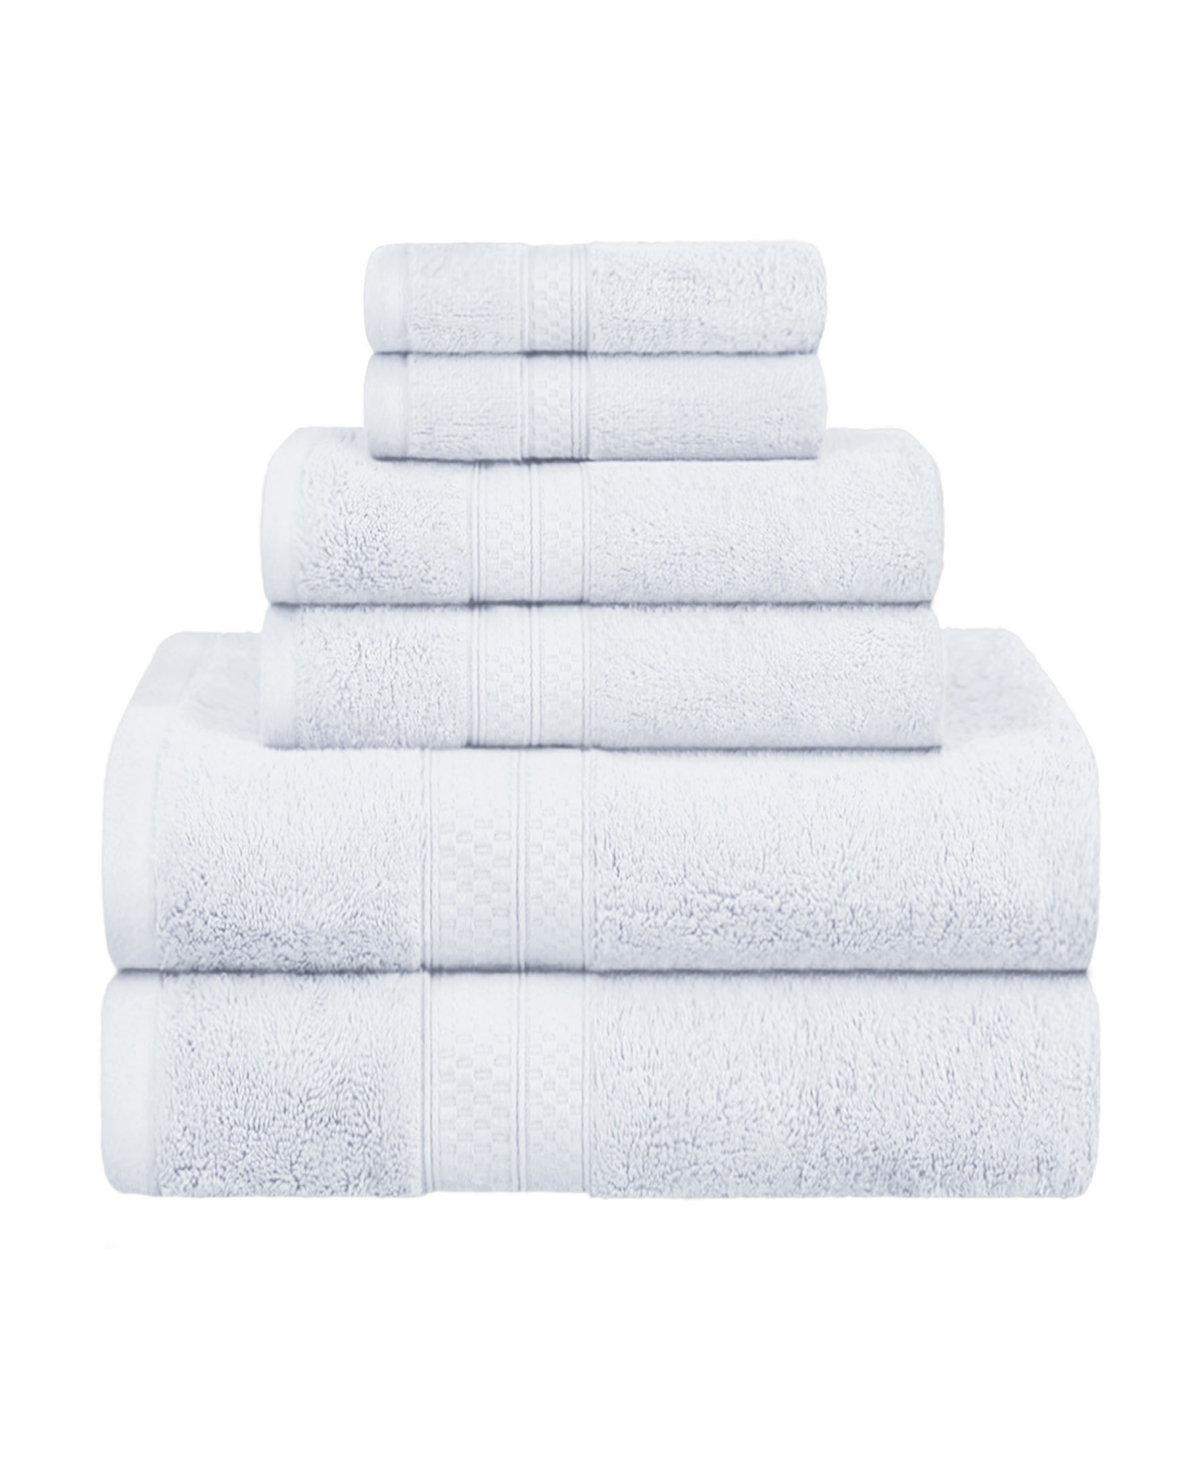 Superior Rayon From Bamboo Blend Ultra Soft Quick Drying Solid 6 Piece Assorted Towel Set Bedding In White